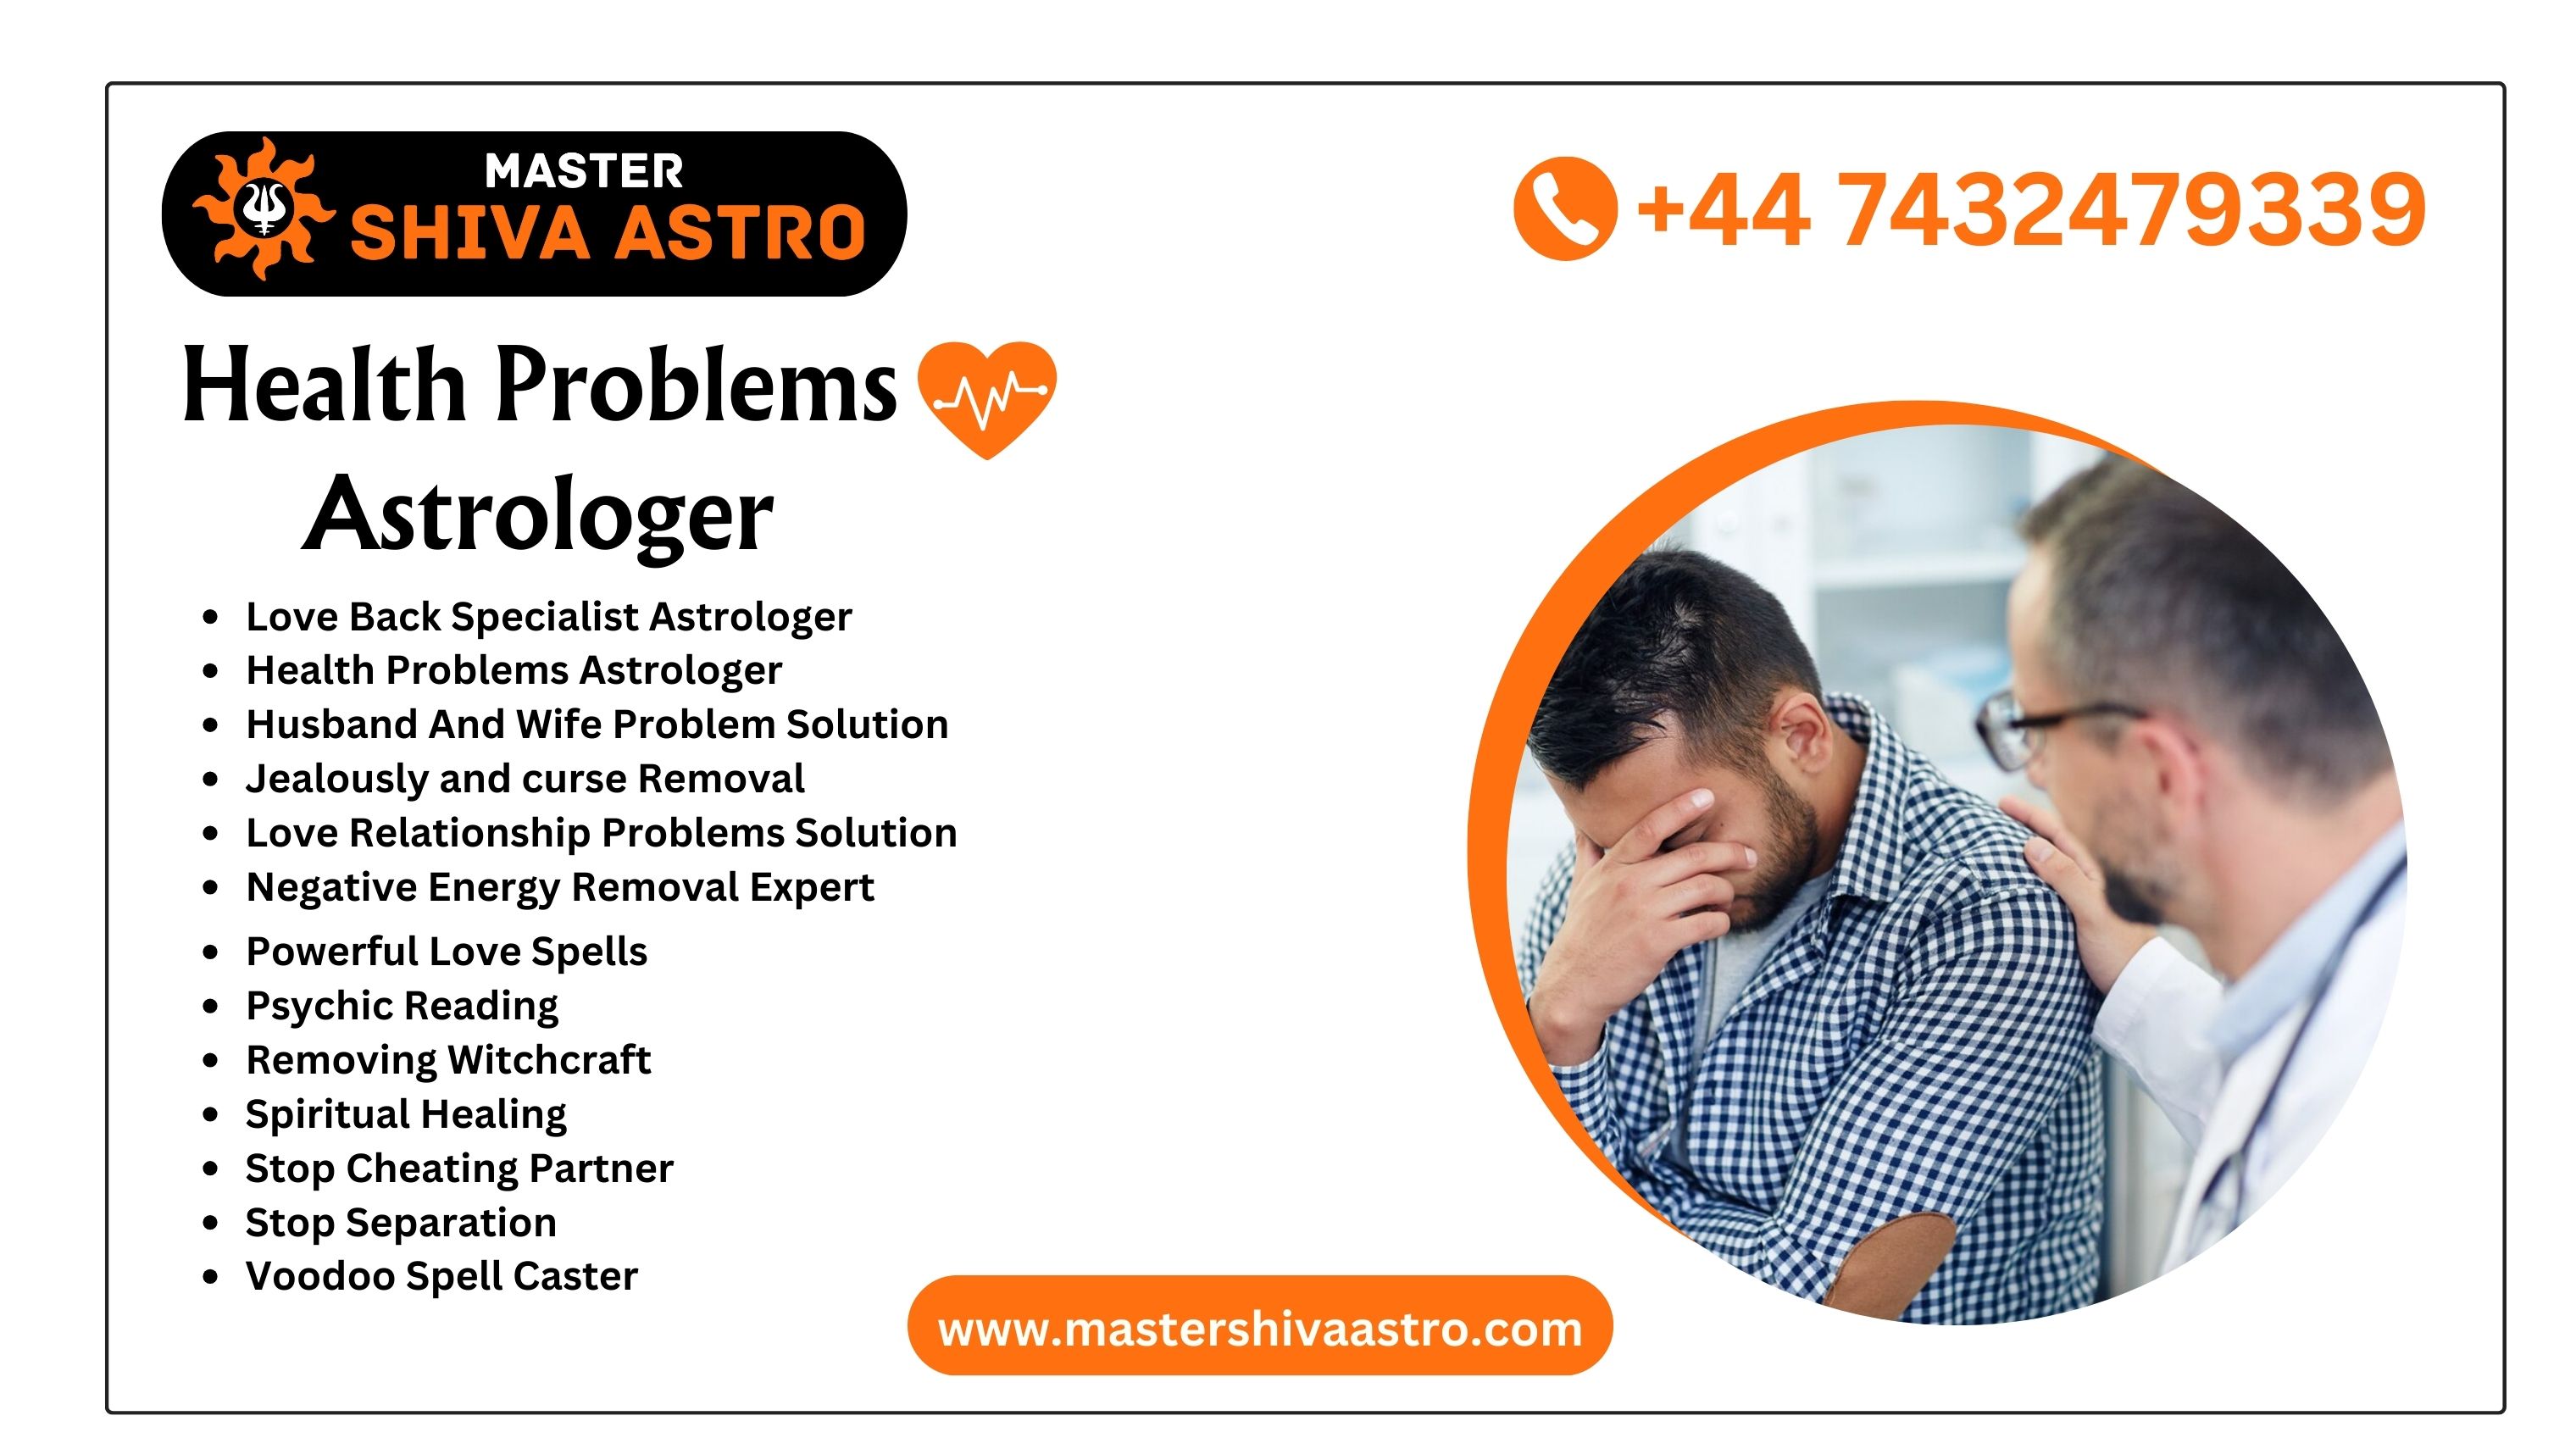 Health Problems Specialist Astrologer